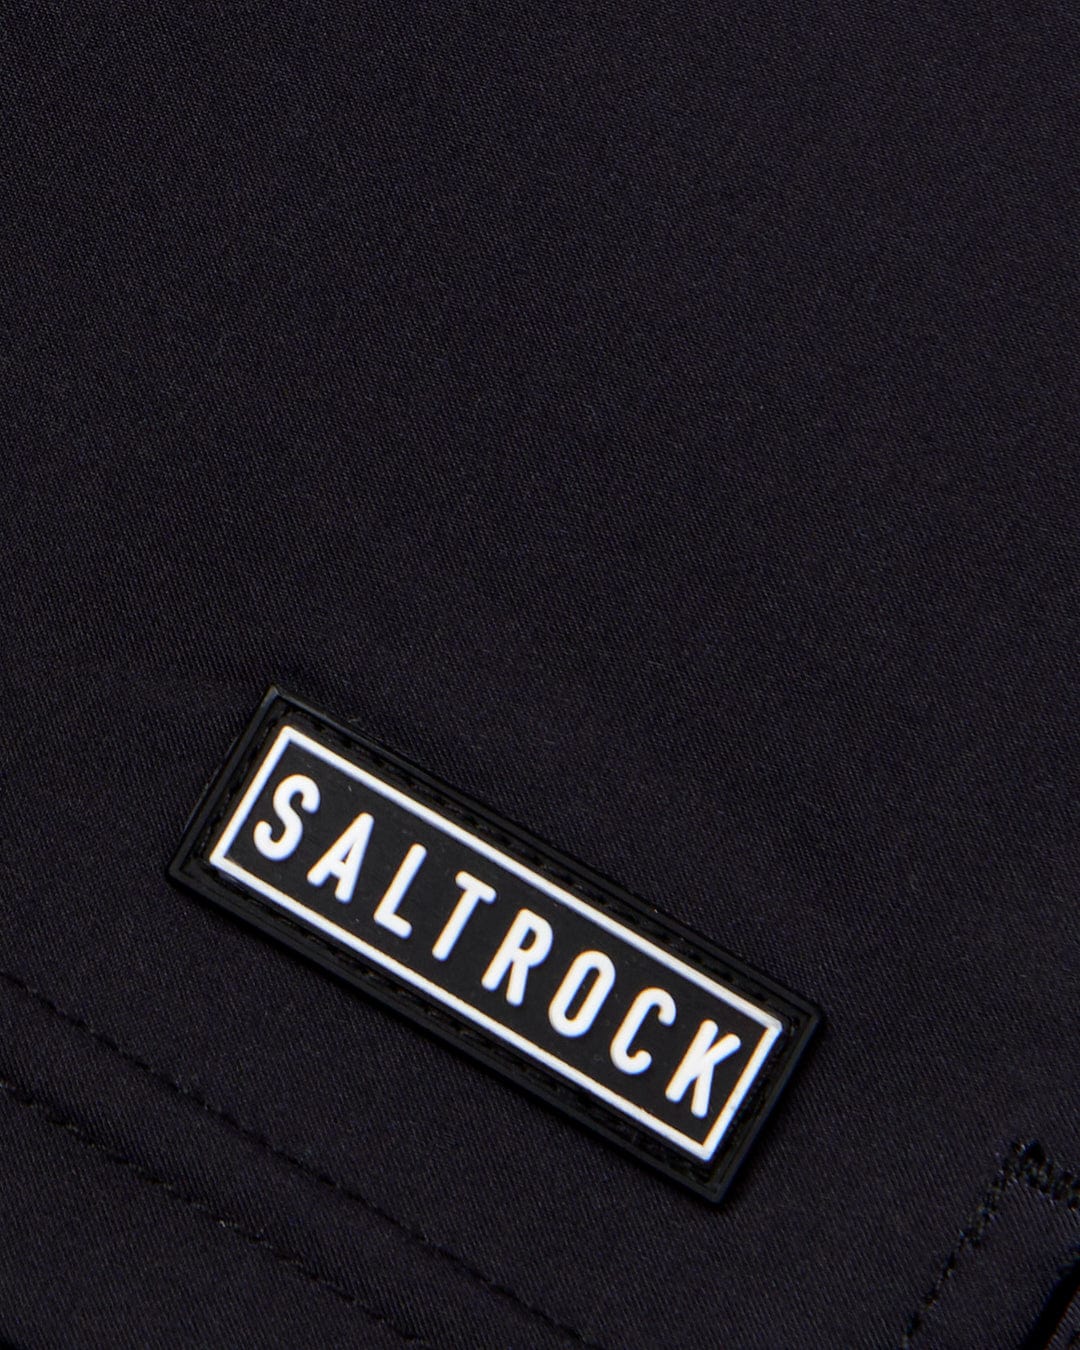 A close up of Retro Ribbon - Womens Boardshorts - Black with the word Saltrock on it made from Repreve recycled material.